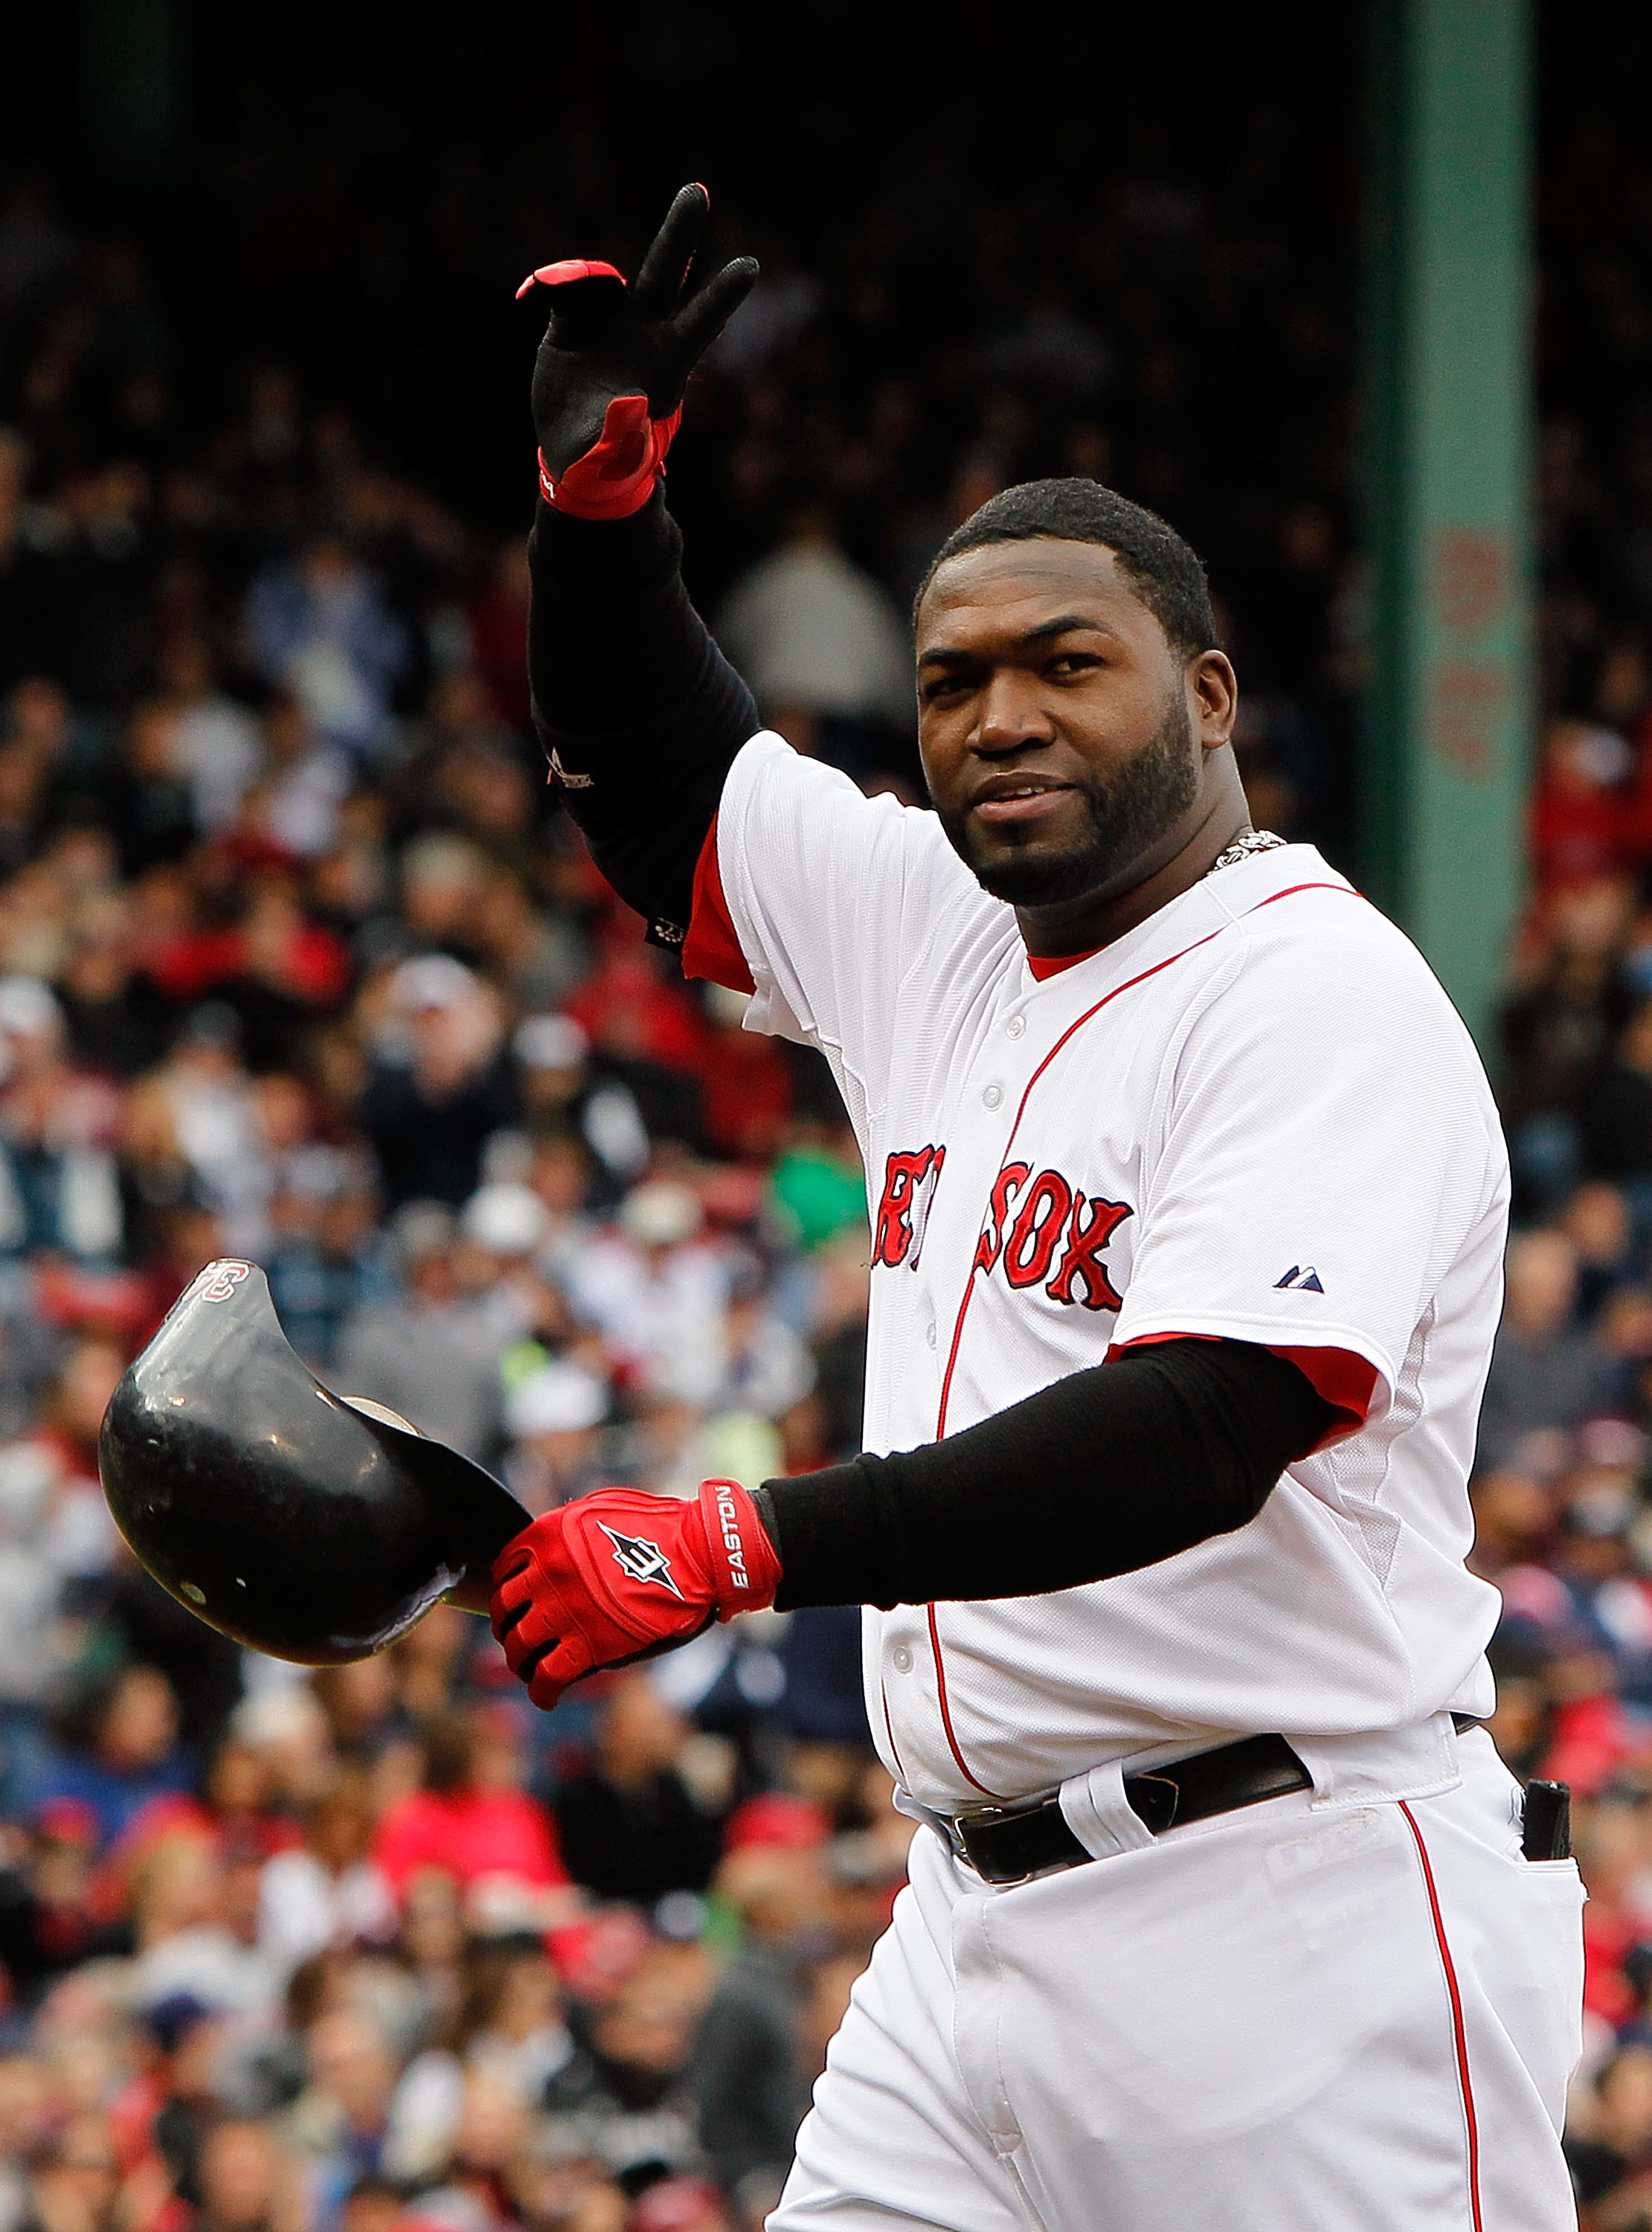 BOSTON - OCTOBER 3: David Ortiz #34 of the Boston Red Sox waves to fans after he was replaced by a pinch runner against the New York Yankees at Fenway Park, October 3, 2010, in Boston, Massachusetts. (Photo by Jim Rogash/Getty Images)